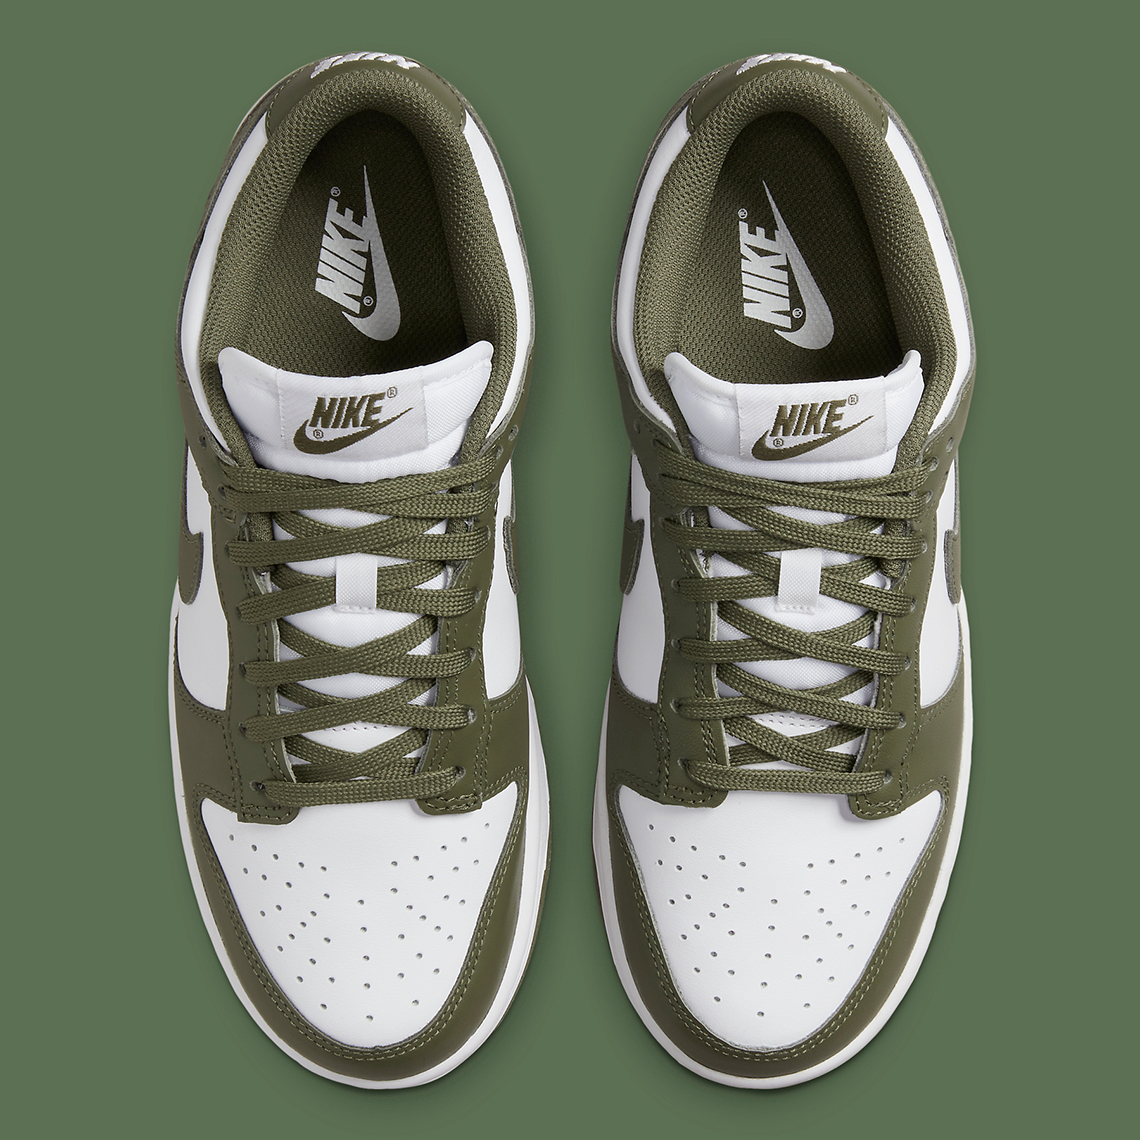 green nike air force sneakers new release Medium Olive Dd1503 120 3